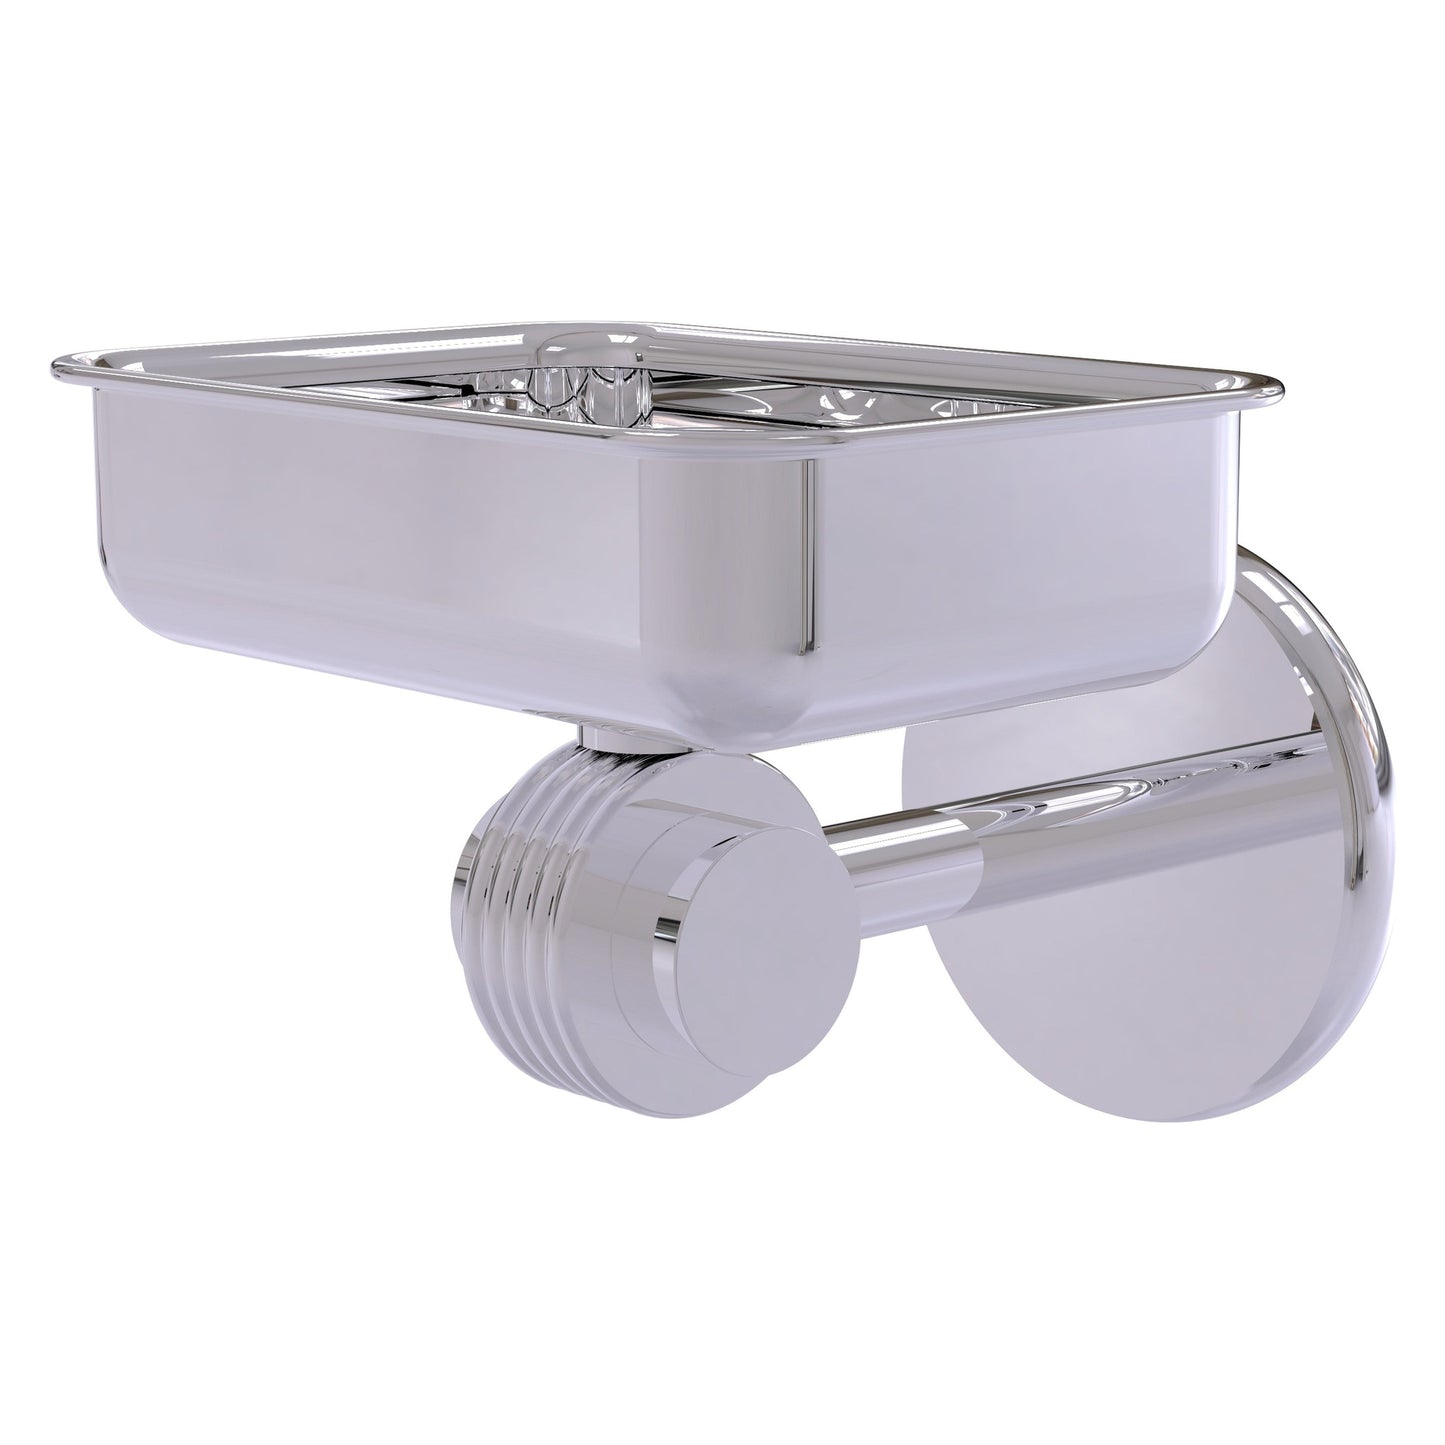 Allied Brass Satellite Orbit Two 4.5" x 3.5" Polished Chrome Solid Brass Wall-Mounted Soap Dish With Grooved Accents